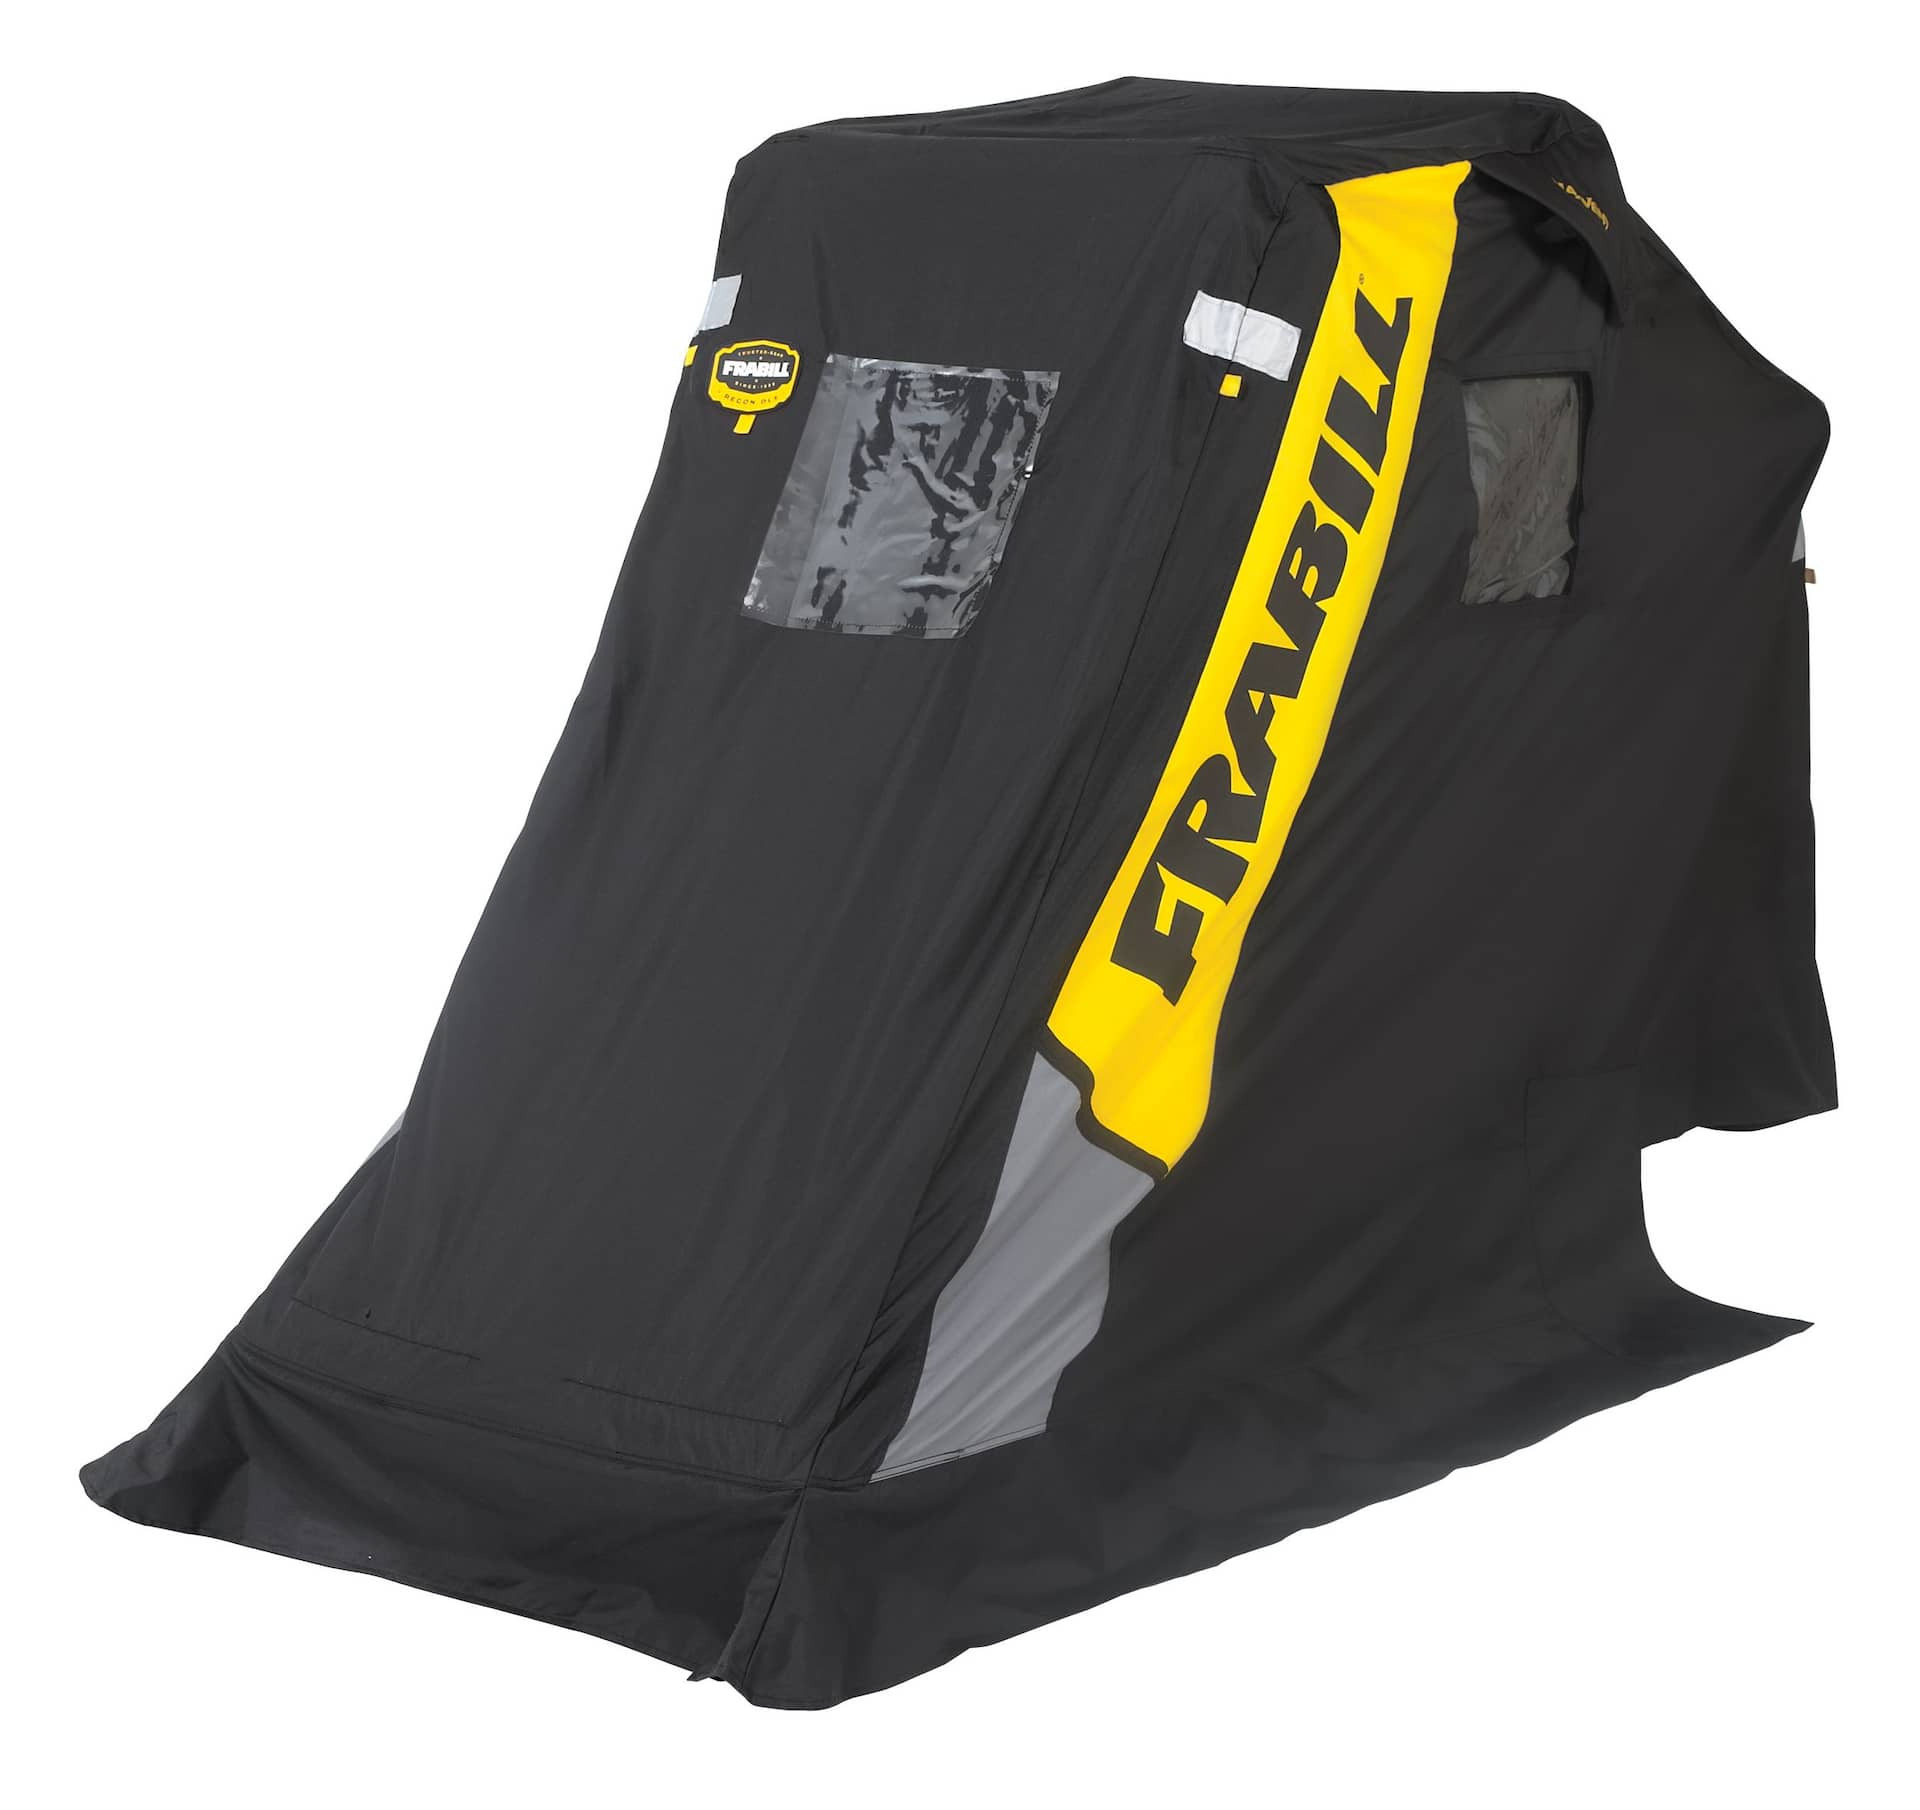 Frabill Recon 1-Man Deluxe Ice Shelter